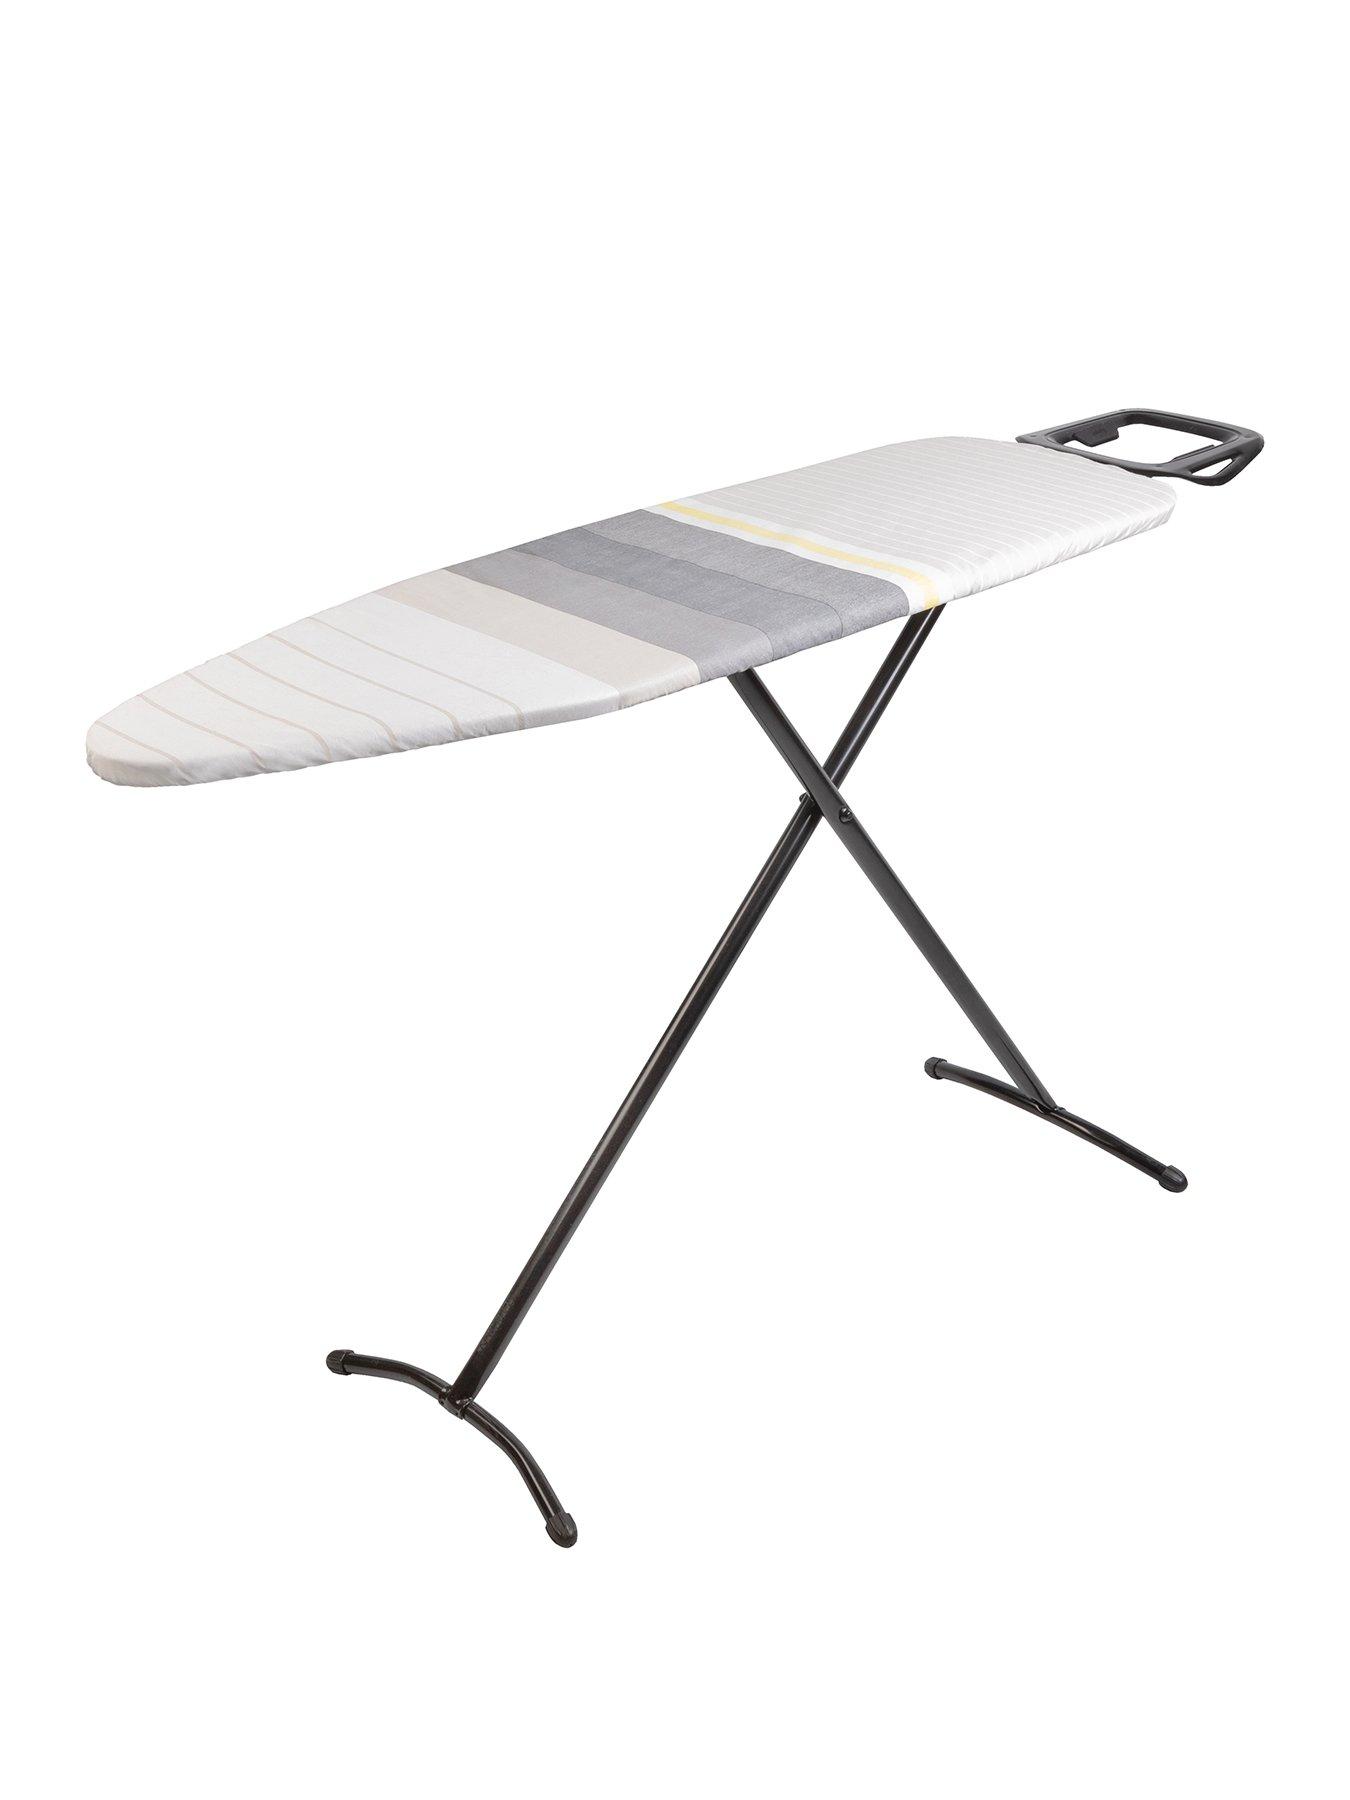 Ironing Board Cover Elasticated Easy Fit Double Layer Heat Reflective  Backing